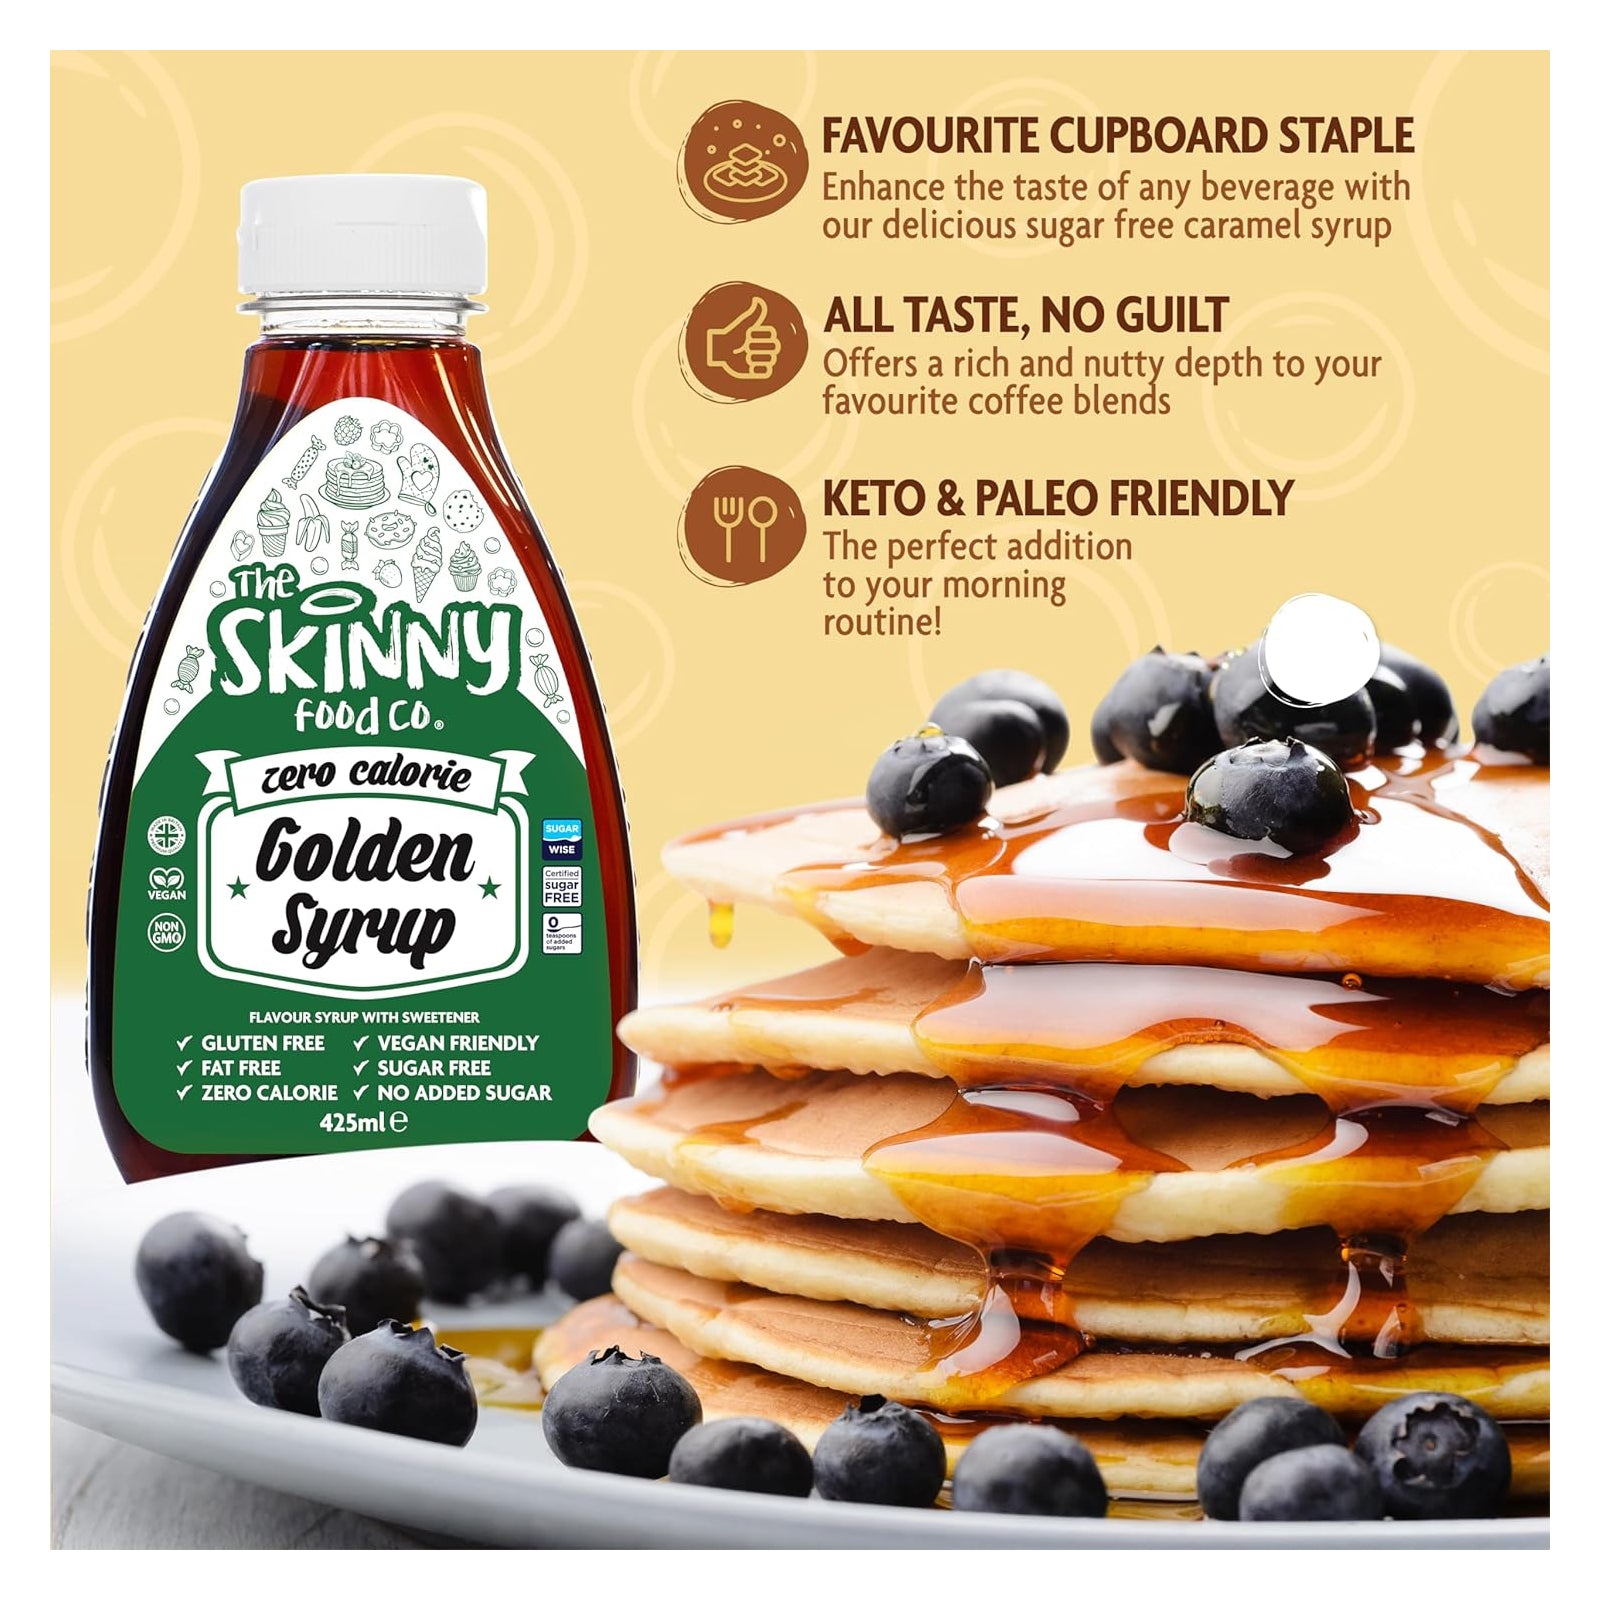 The Skinny Food Co. Zero Calorie Syrup Golden Syrup / 425ml